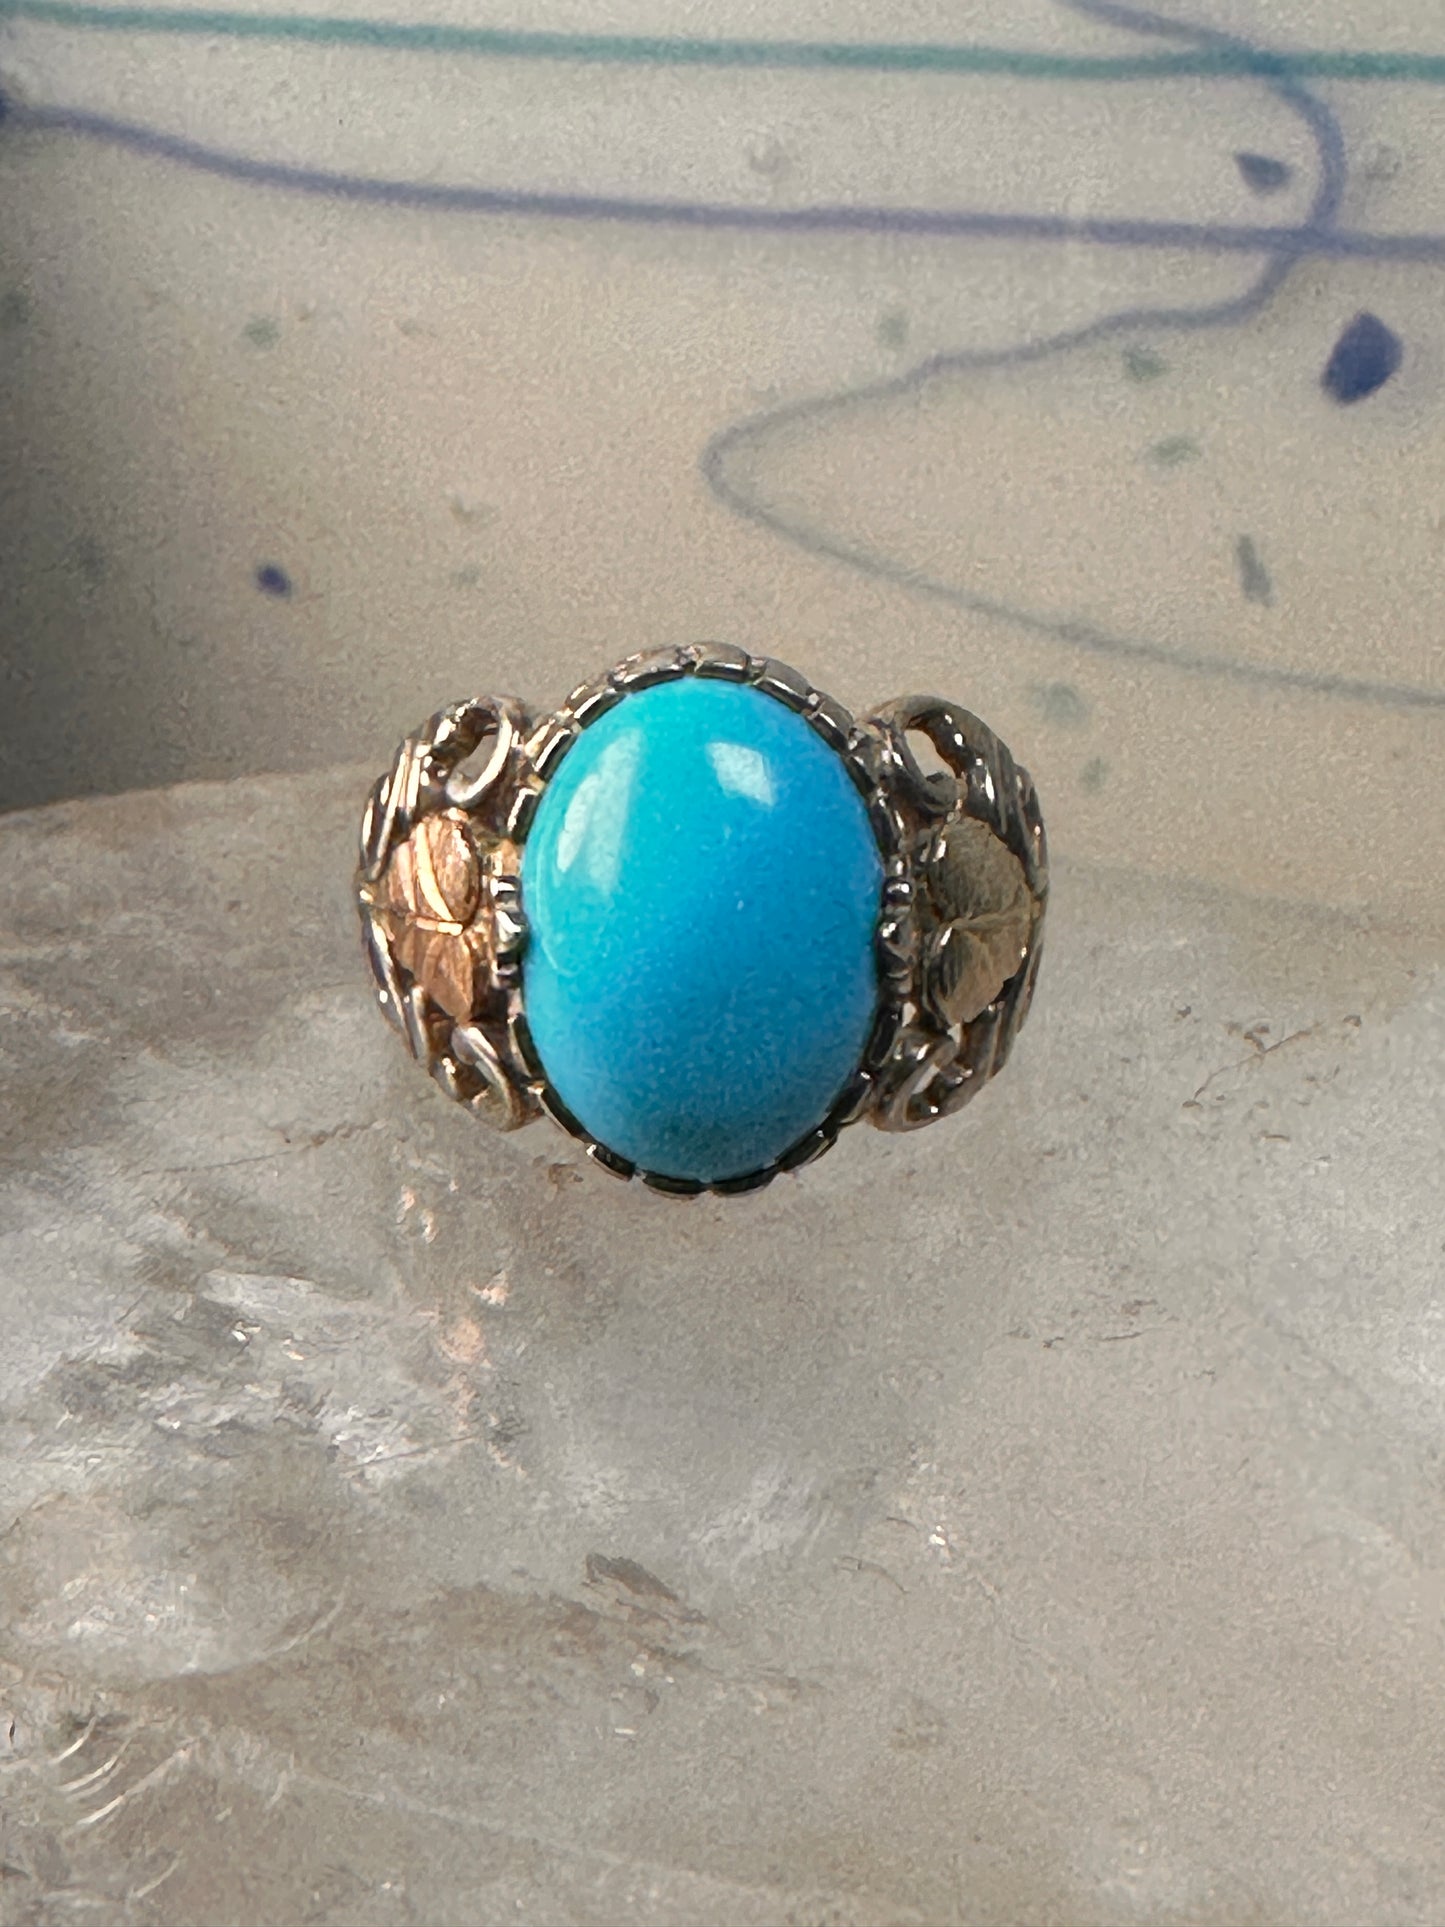 Black Hills Gold ring Turquoise band  size 5.75 sterling silver women girls